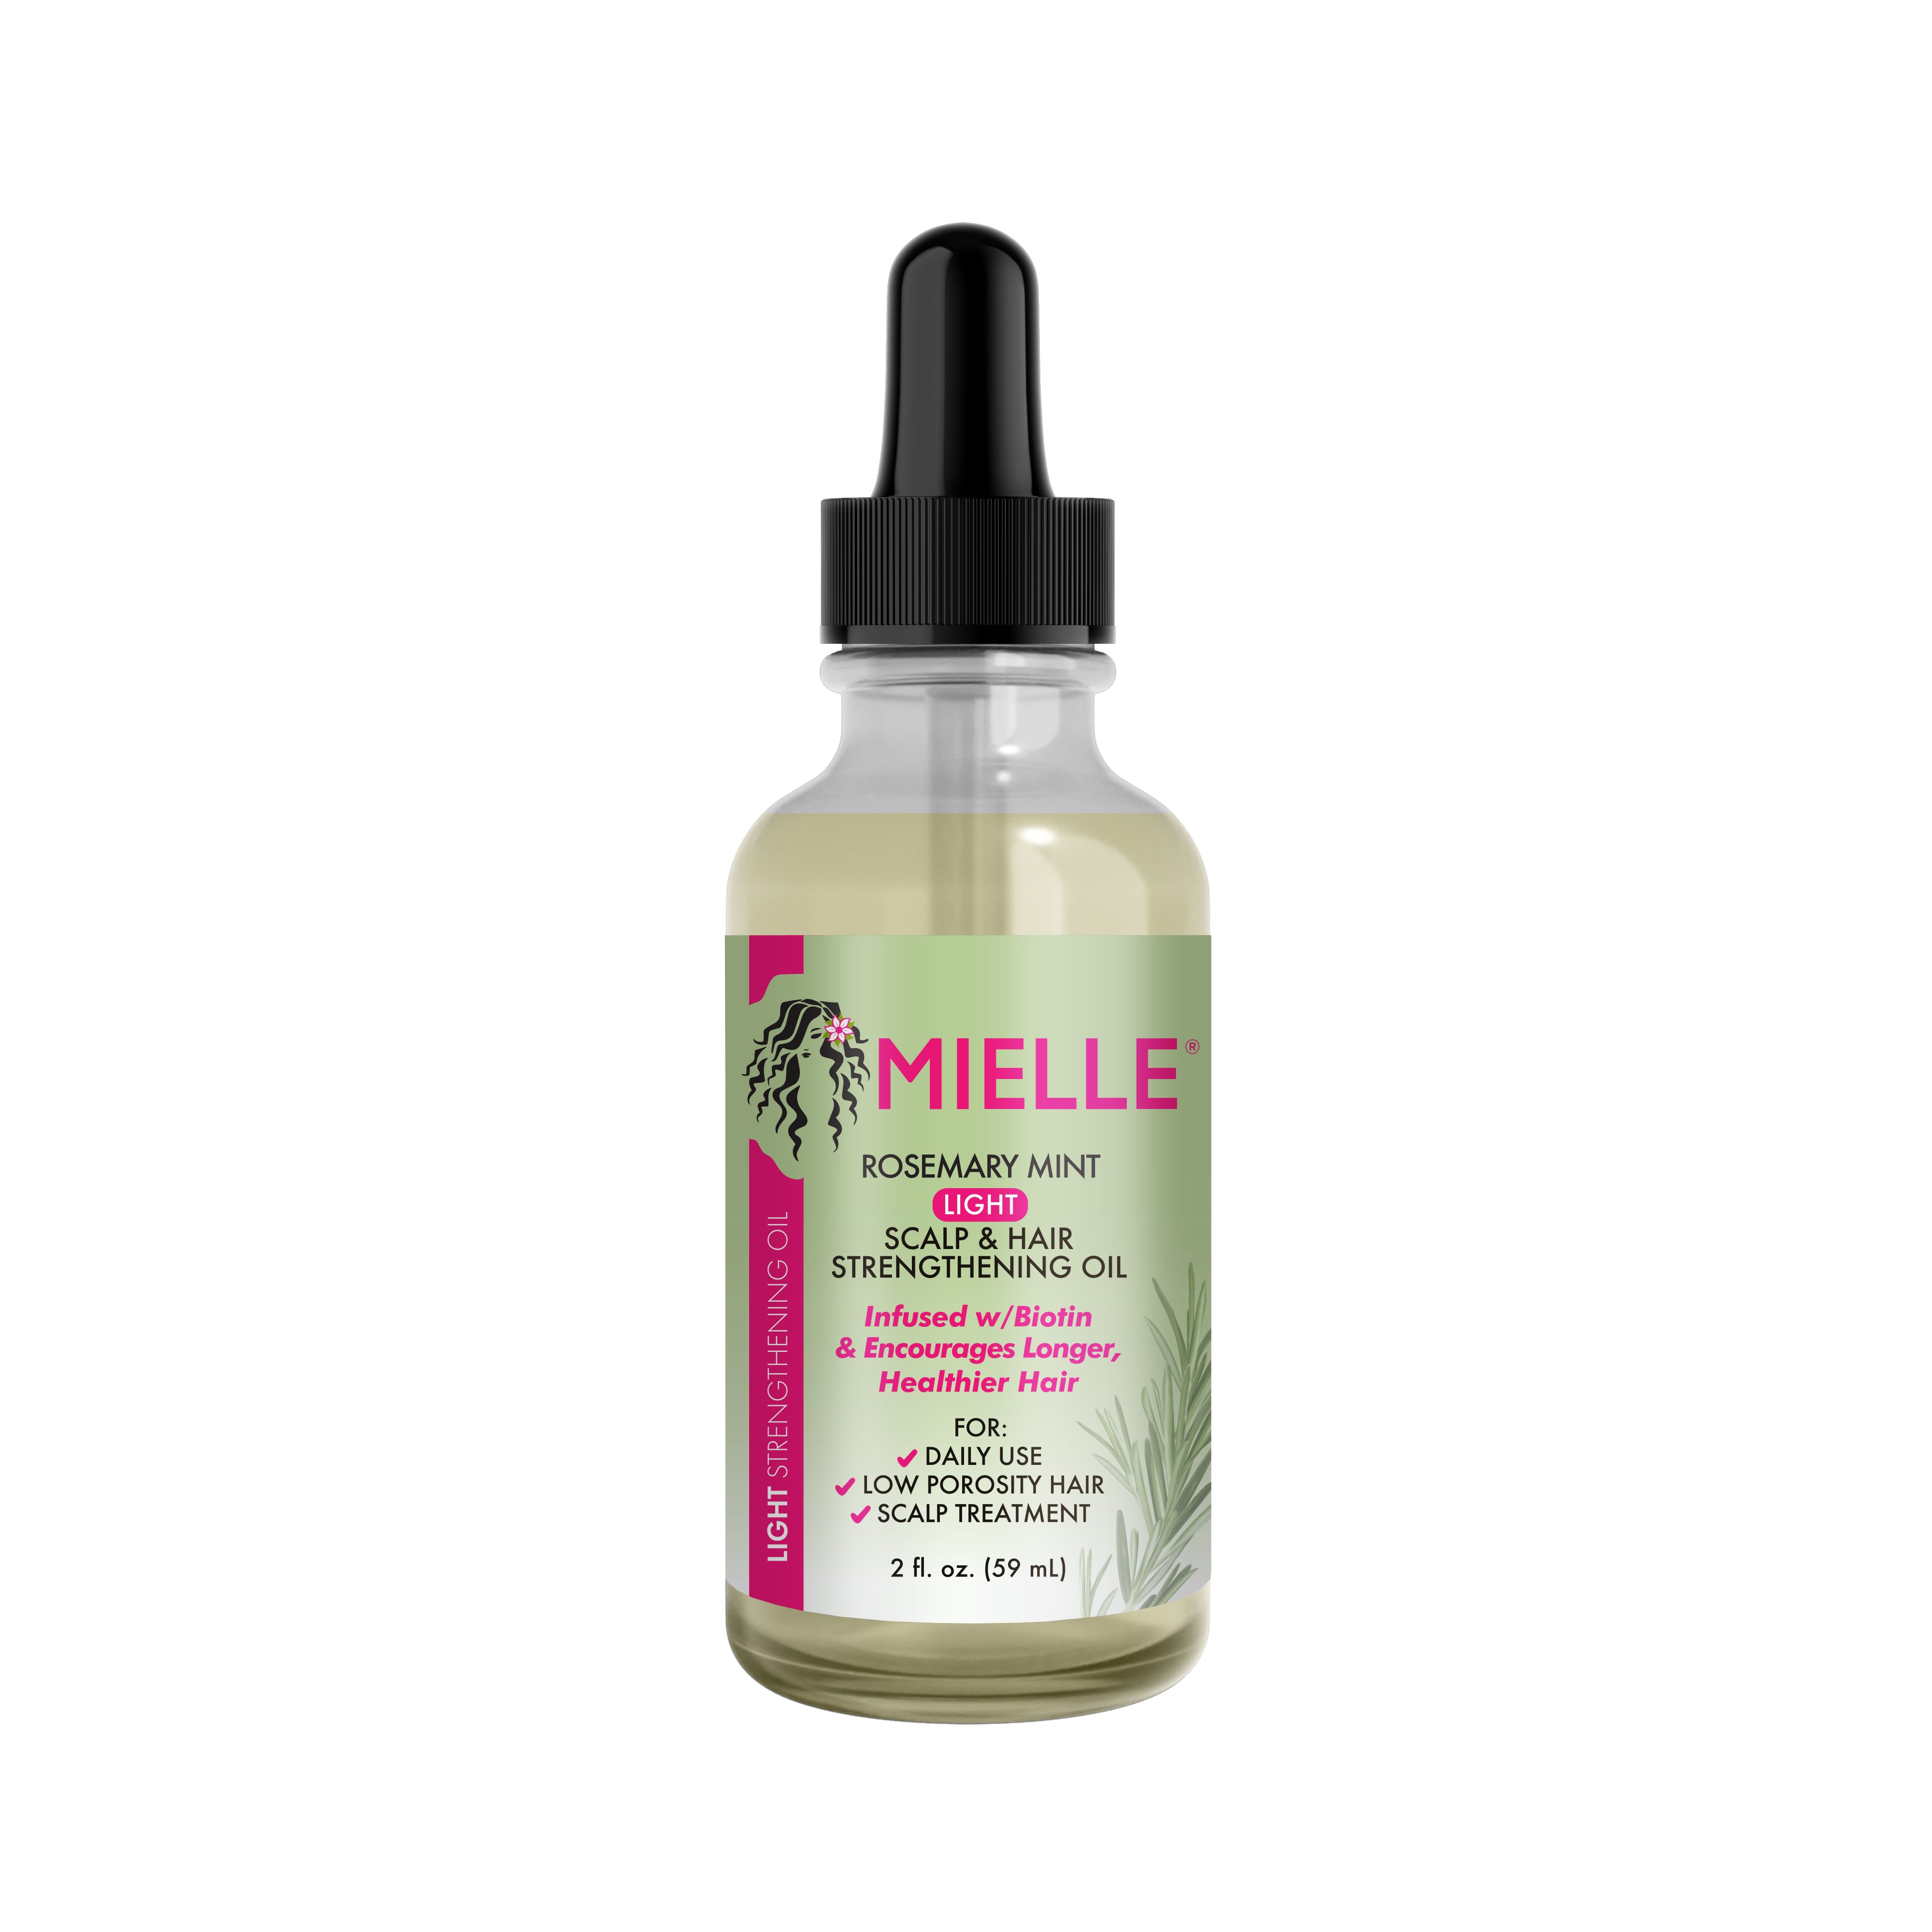 Mielle Strengthening Scalp & Edge Cleansing Oil - Rosemary Mint - Shop  Styling Products & Treatments at H-E-B